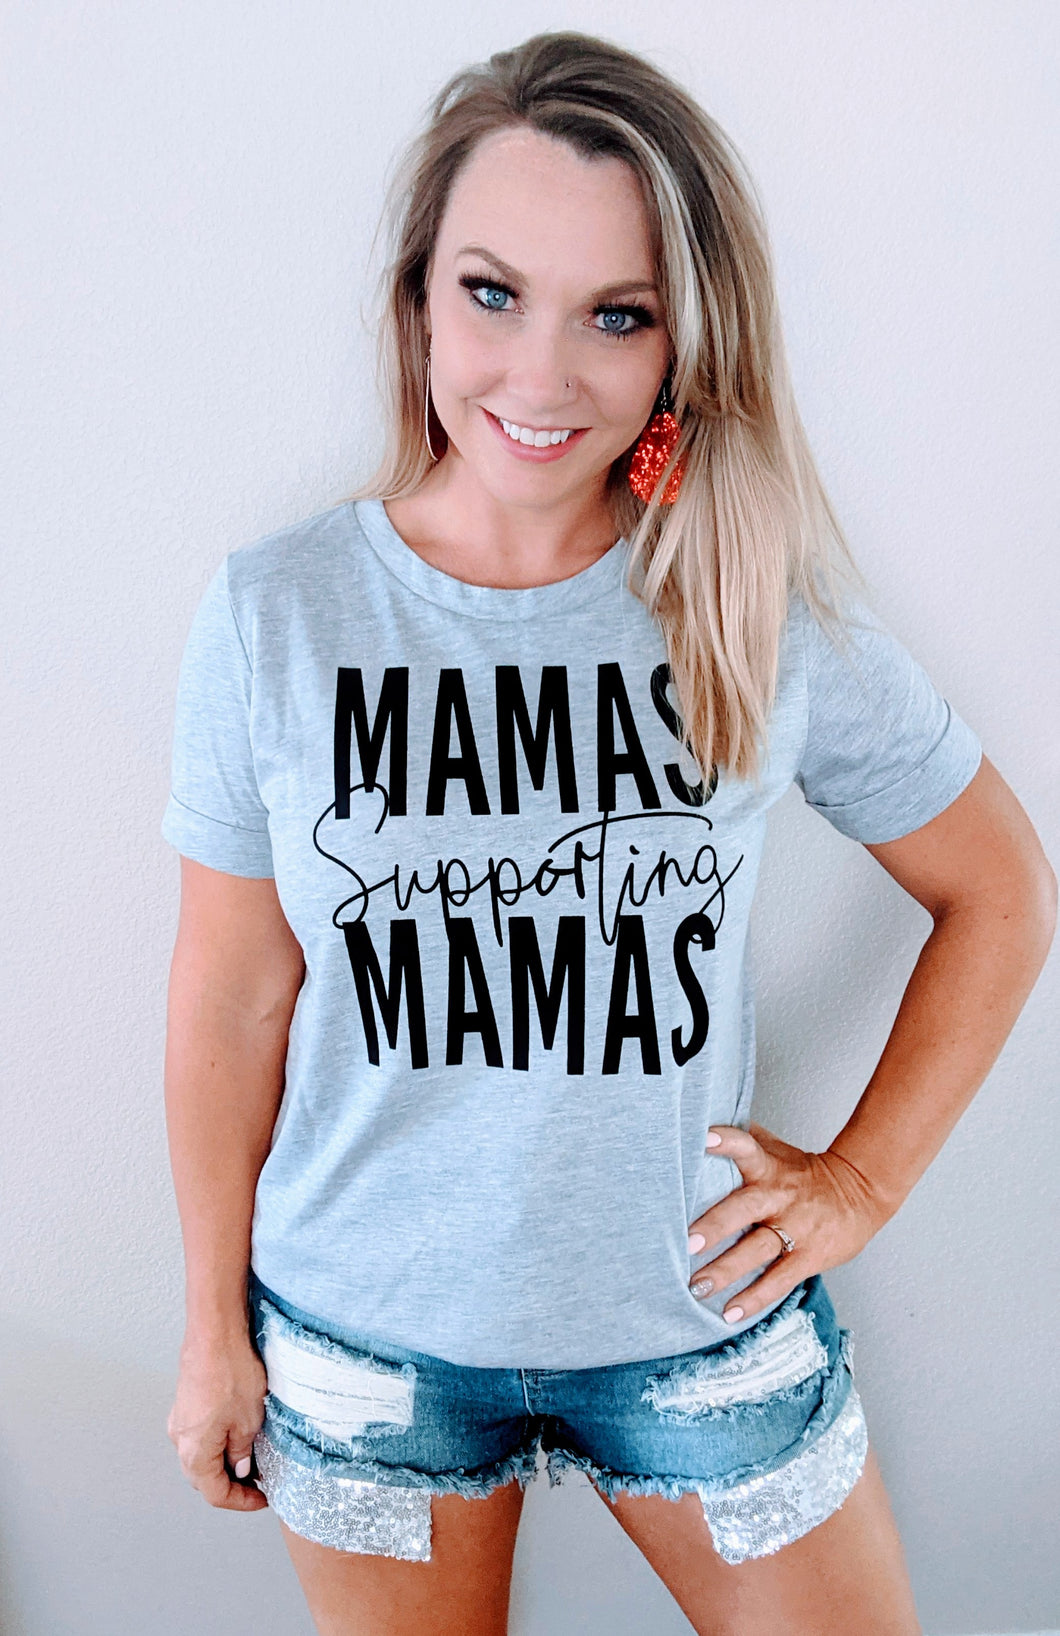 581. MAMAS Supporting Graphic Print Gray Tee